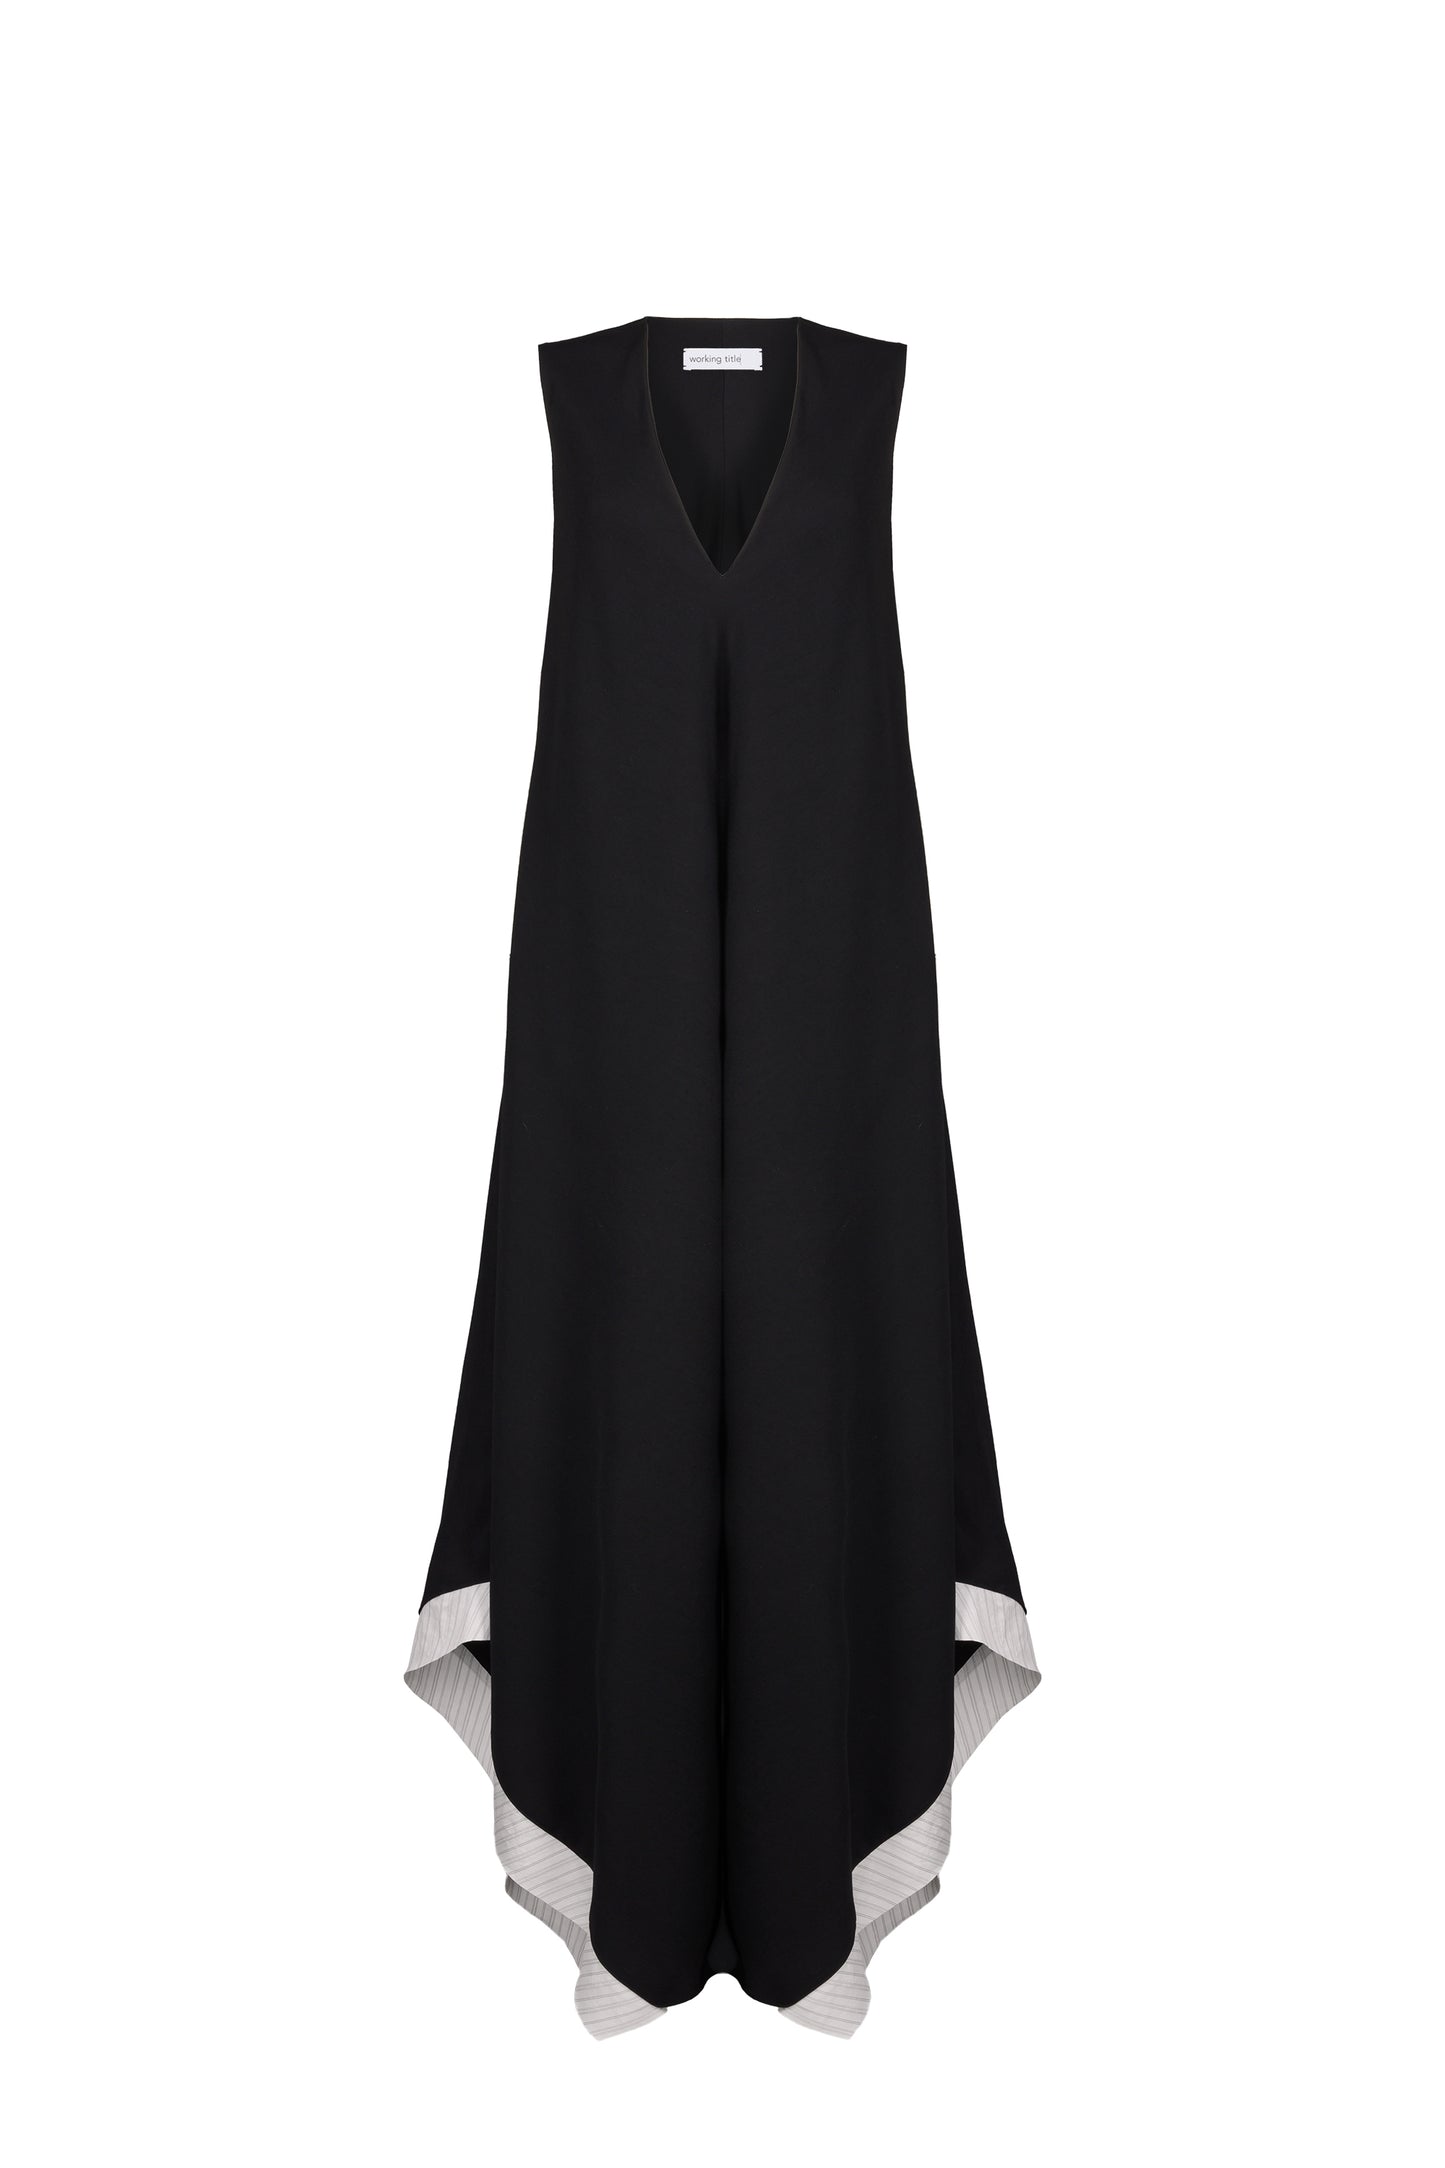 Elegant black sleeveless dress with a bias-cut hem and contrasting white stripe detailing along the edges, featuring a V-neckline and a flowing silhouette for a sophisticated look.